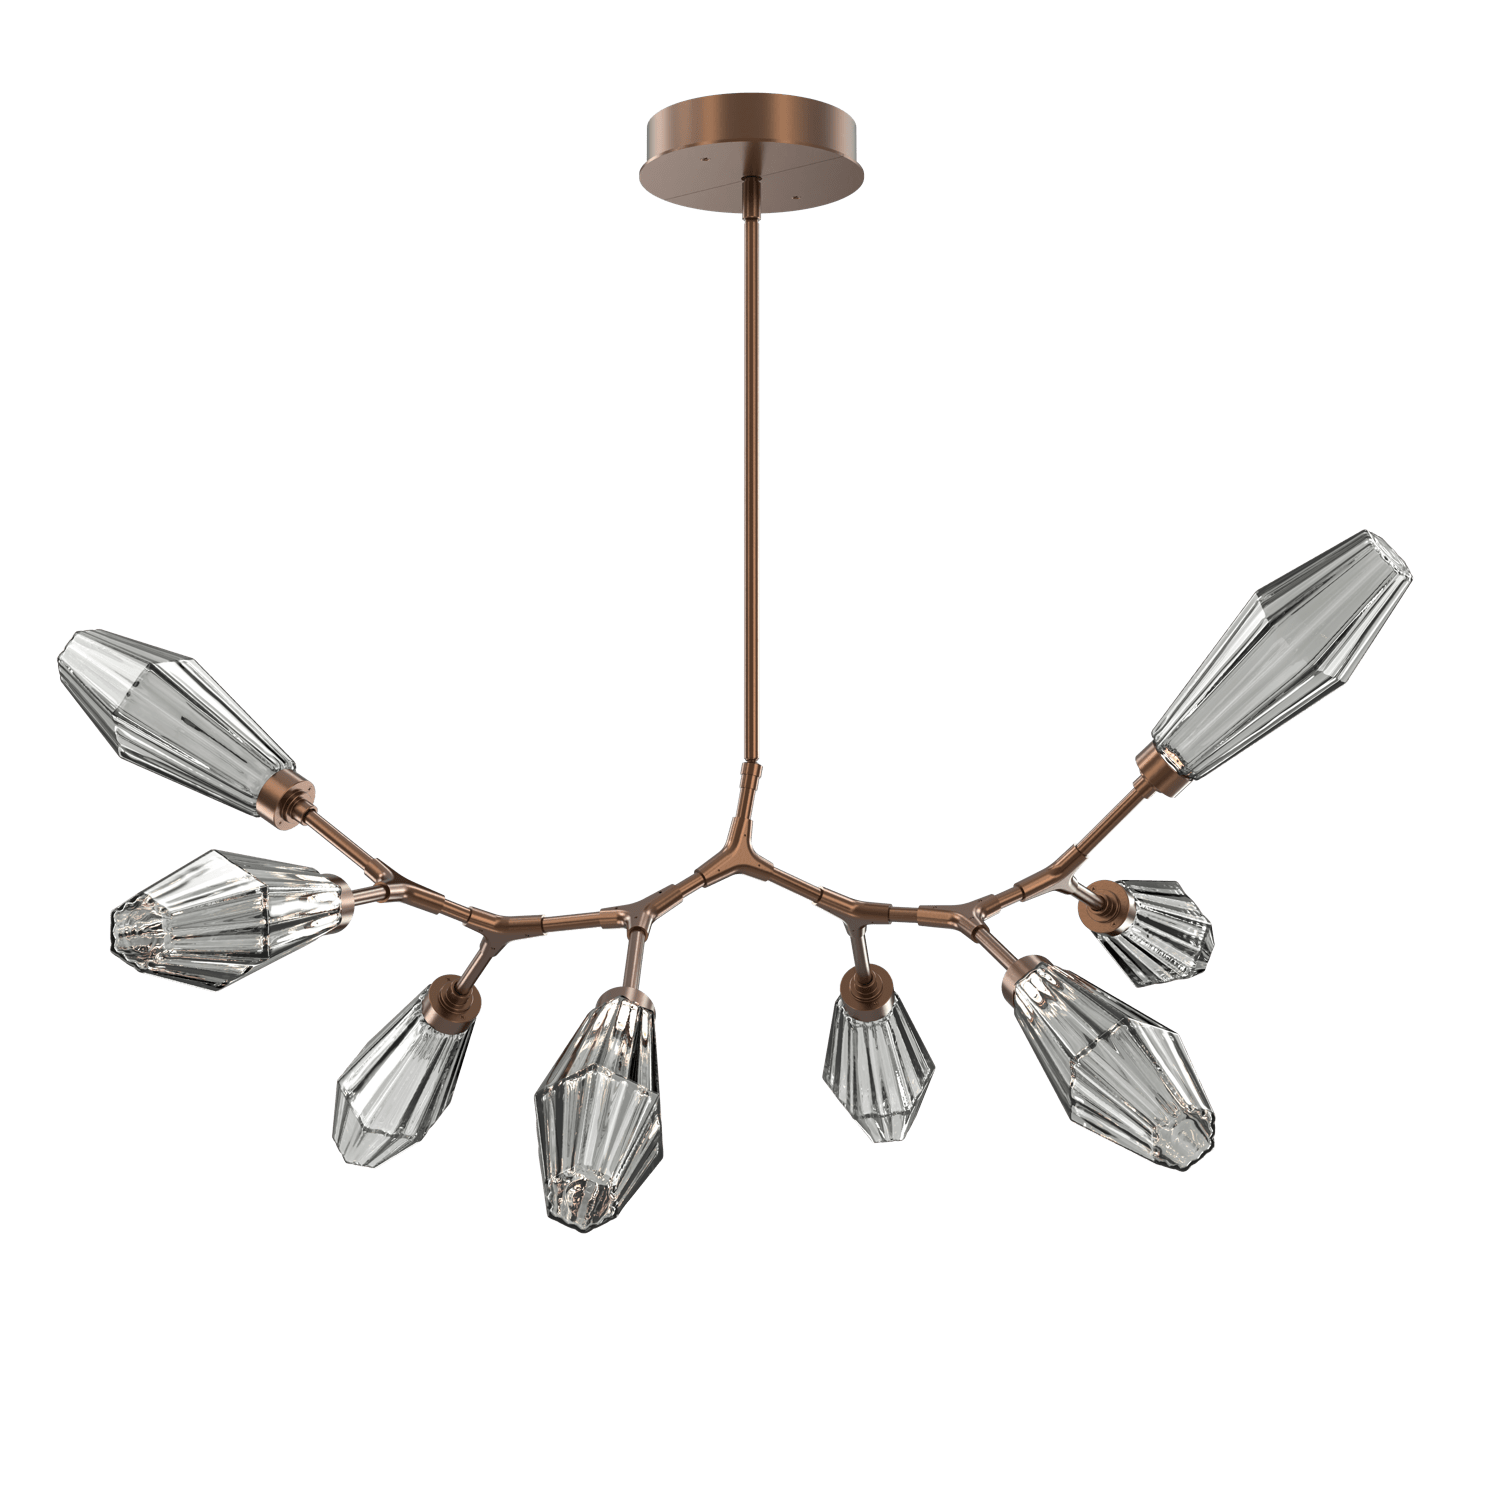 PLB0049-BB-BB-RS-Hammerton-Studio-Aalto-8-light-modern-branch-chandelier-with-burnished-bronze-finish-and-optic-ribbed-smoke-glass-shades-and-LED-lamping